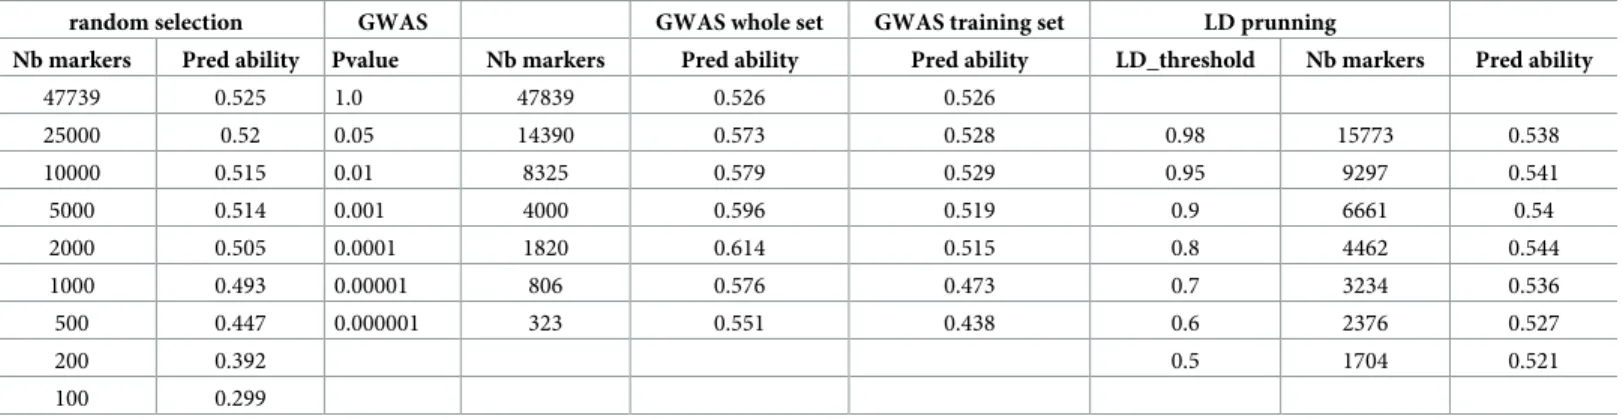 Table 1. Number of markers and predictive abilities achieved with marker subset from 1) random selection (RMR option); 2) GWAS on whole marker set (option ANO); 3) GWAS on training set only (not included) and 4) LD-pruning.